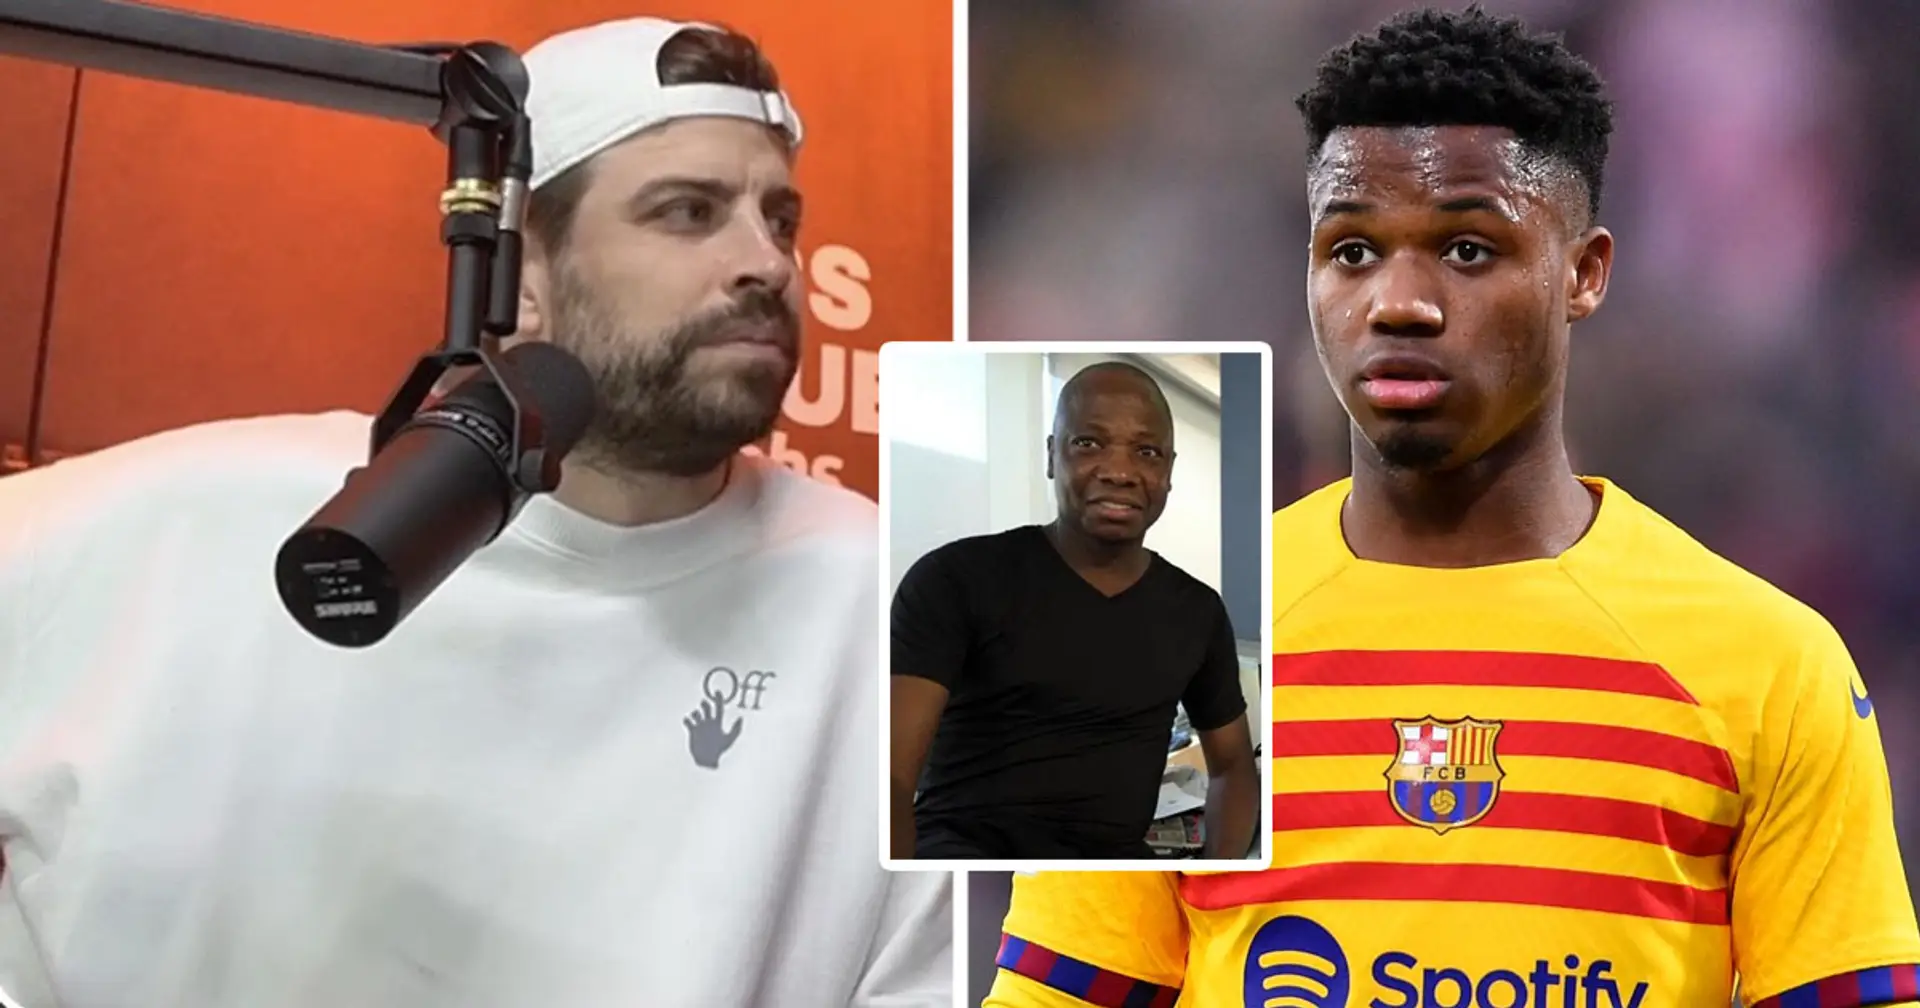 'Football comes from the streets': Pique on why Ansu Fati's family is mishandling youngster's situation